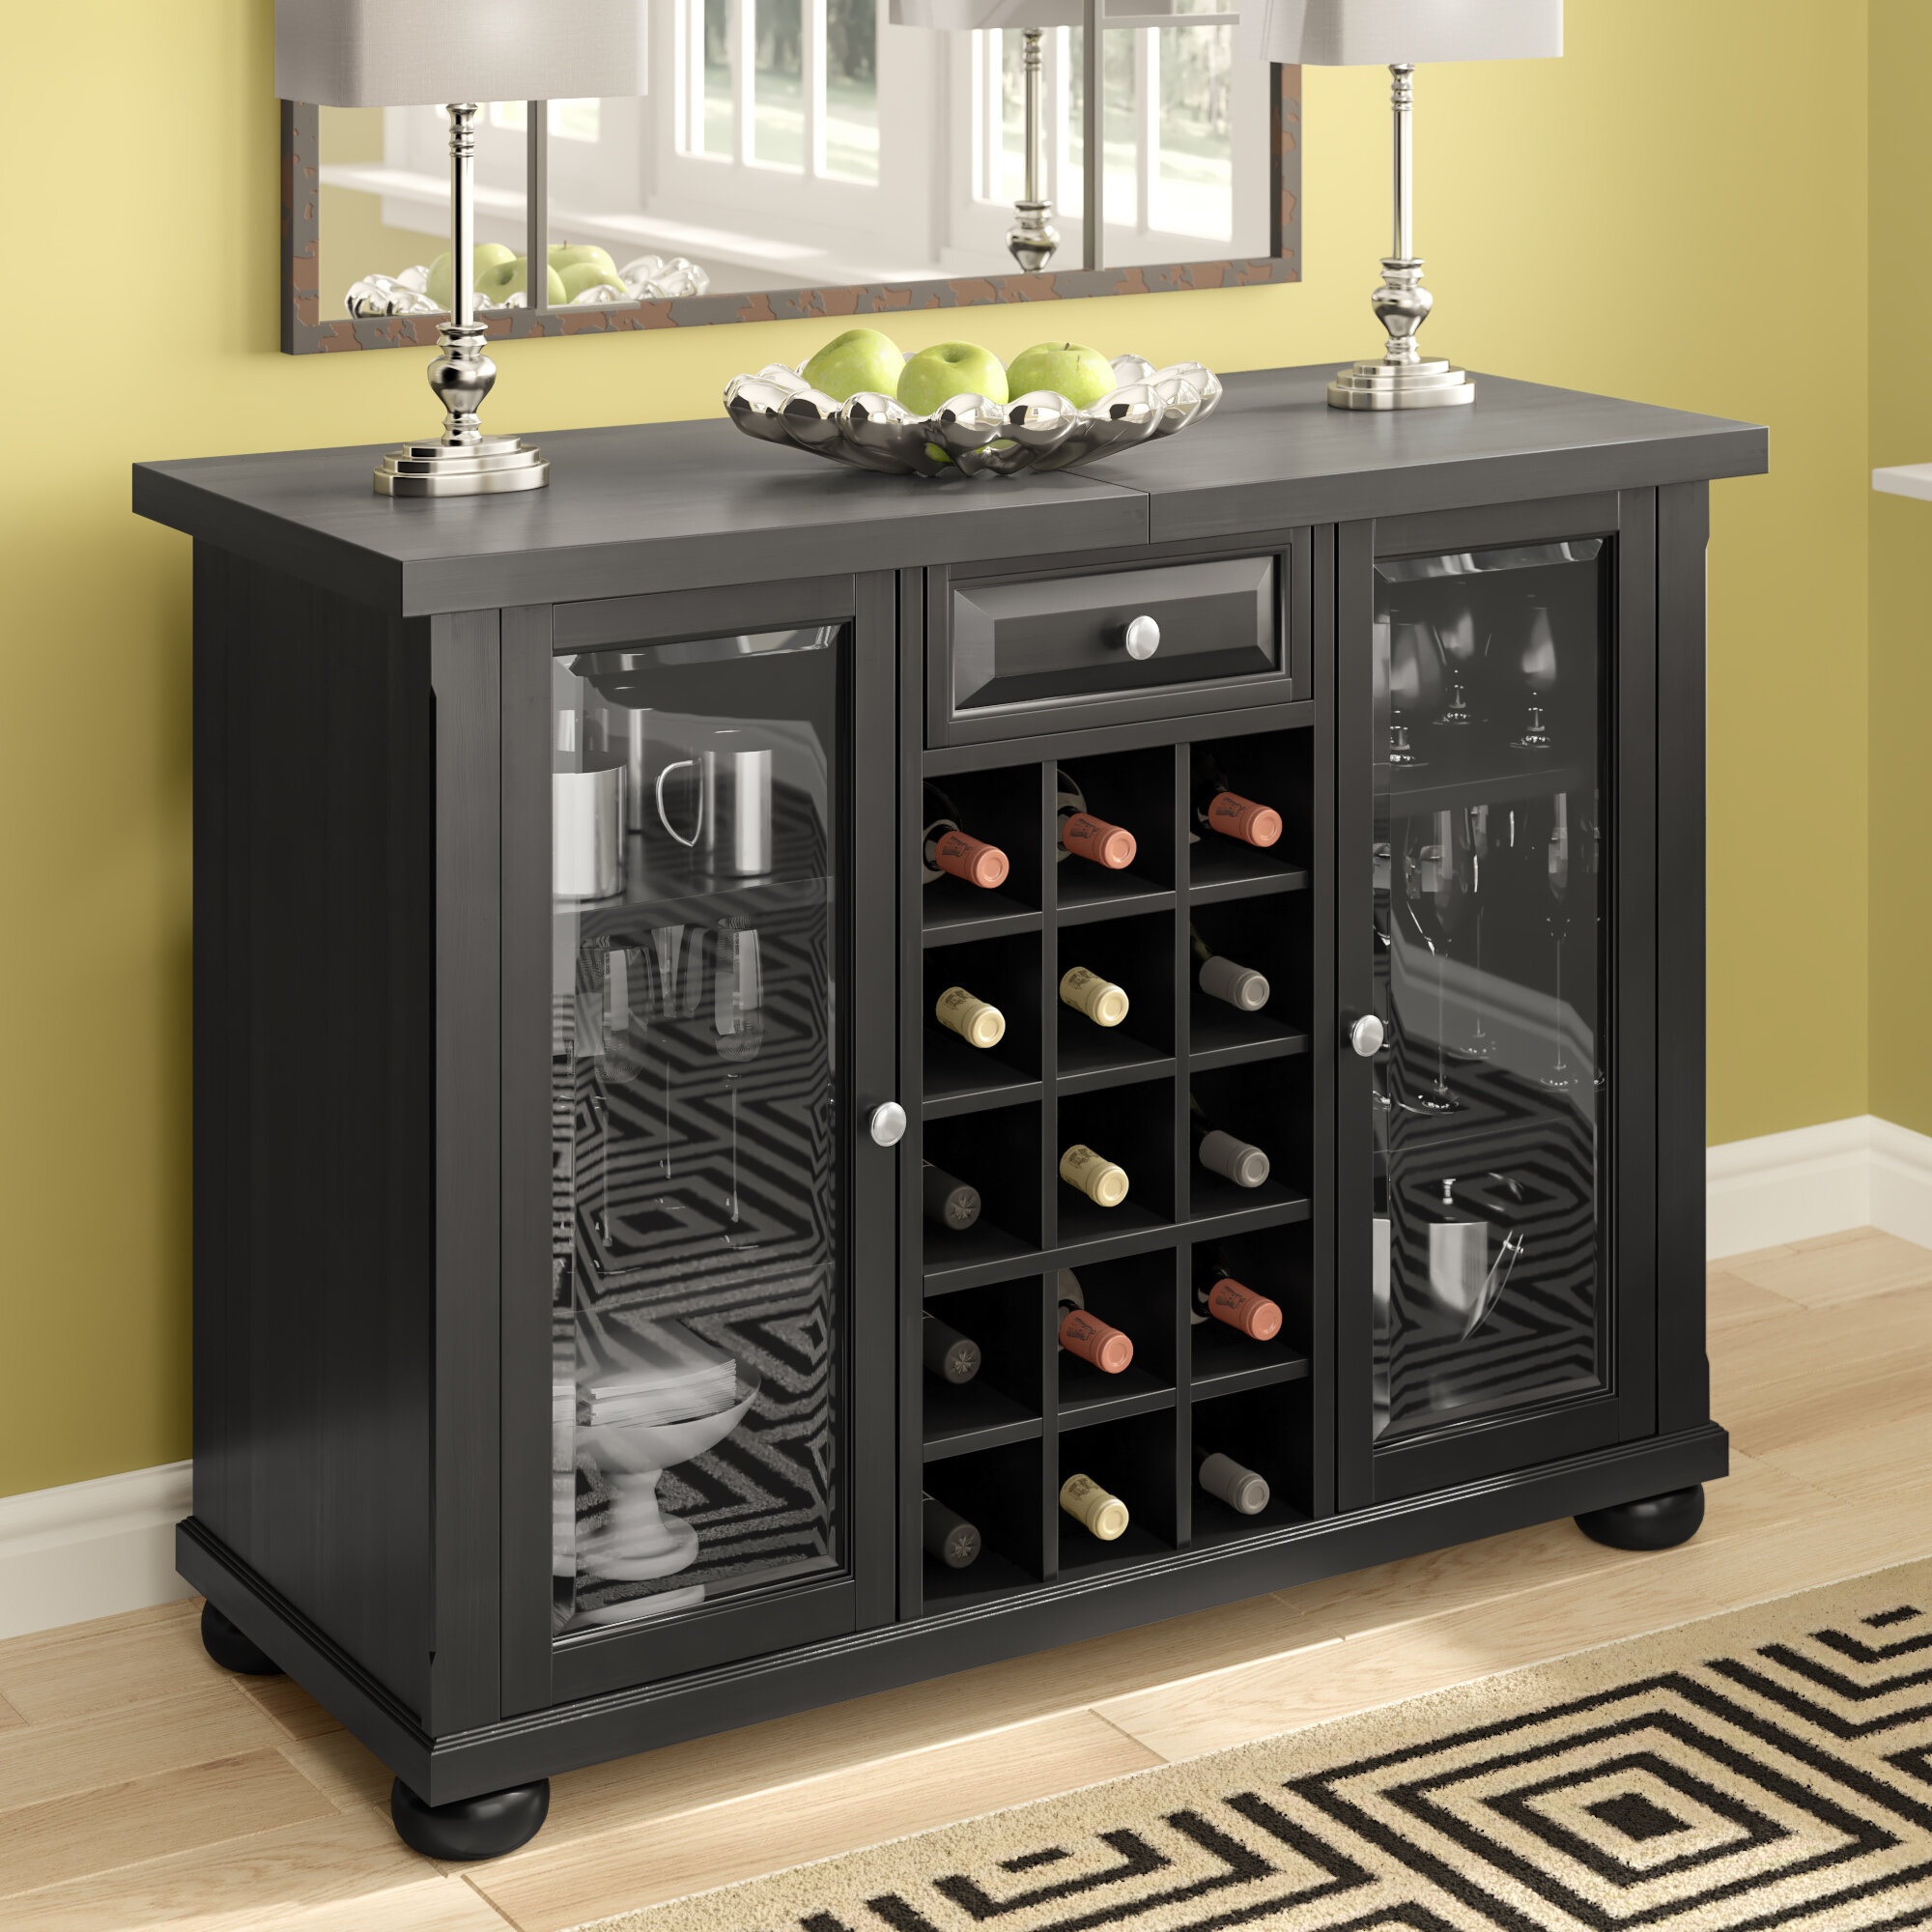 Hedon Bar Cabinet With Wine Storage intended for size 2000 X 2000